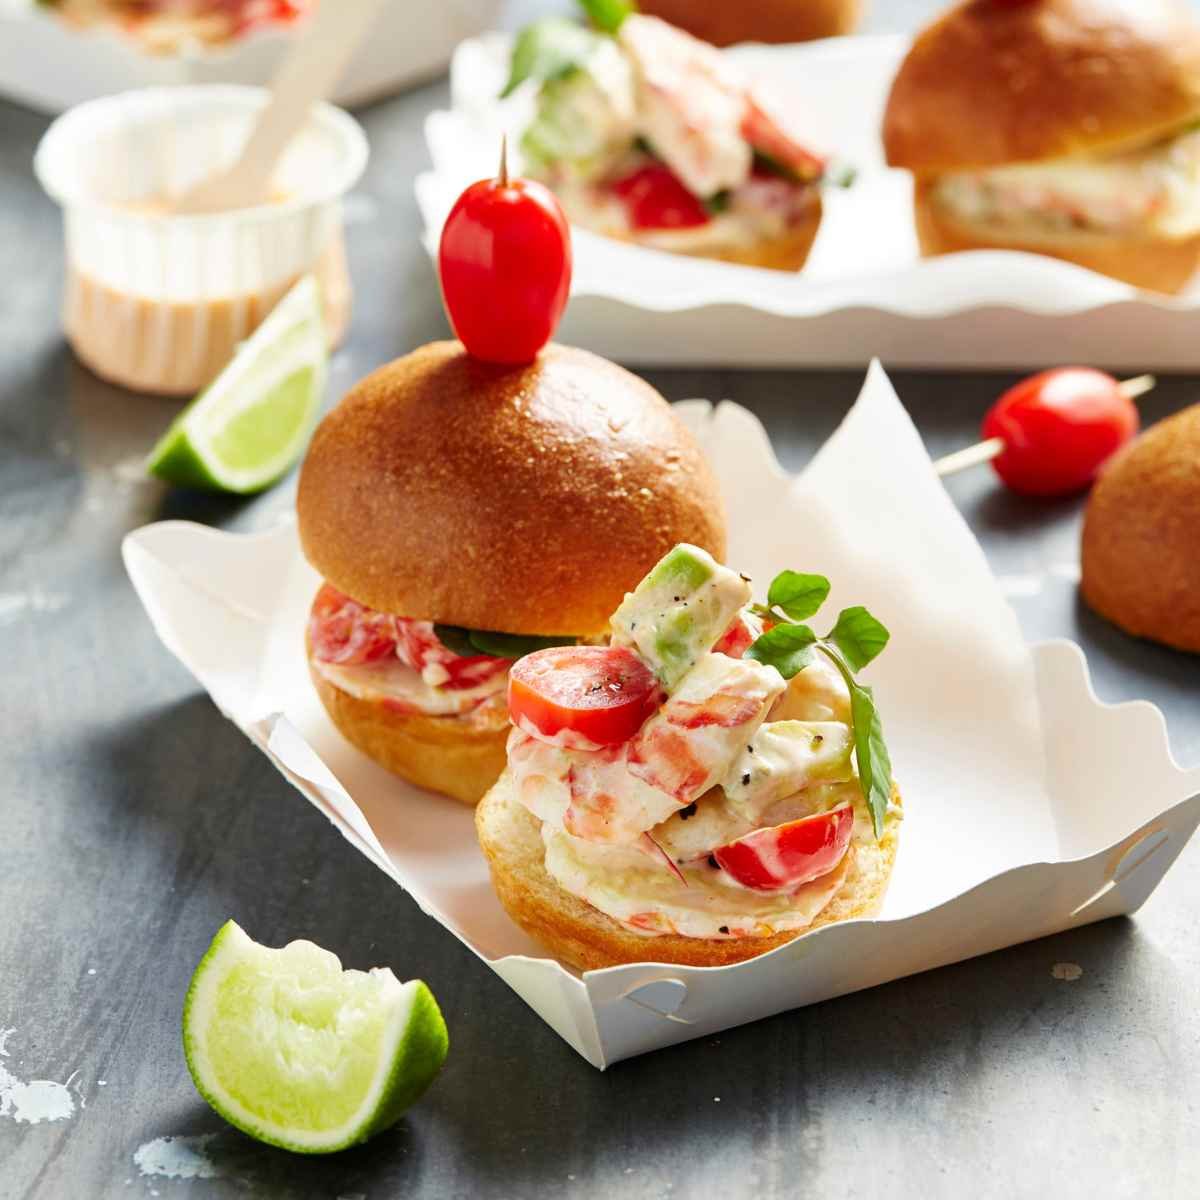 Two slider rolls filled with prawn, solanato tomatoes and avocado in a white paper container.